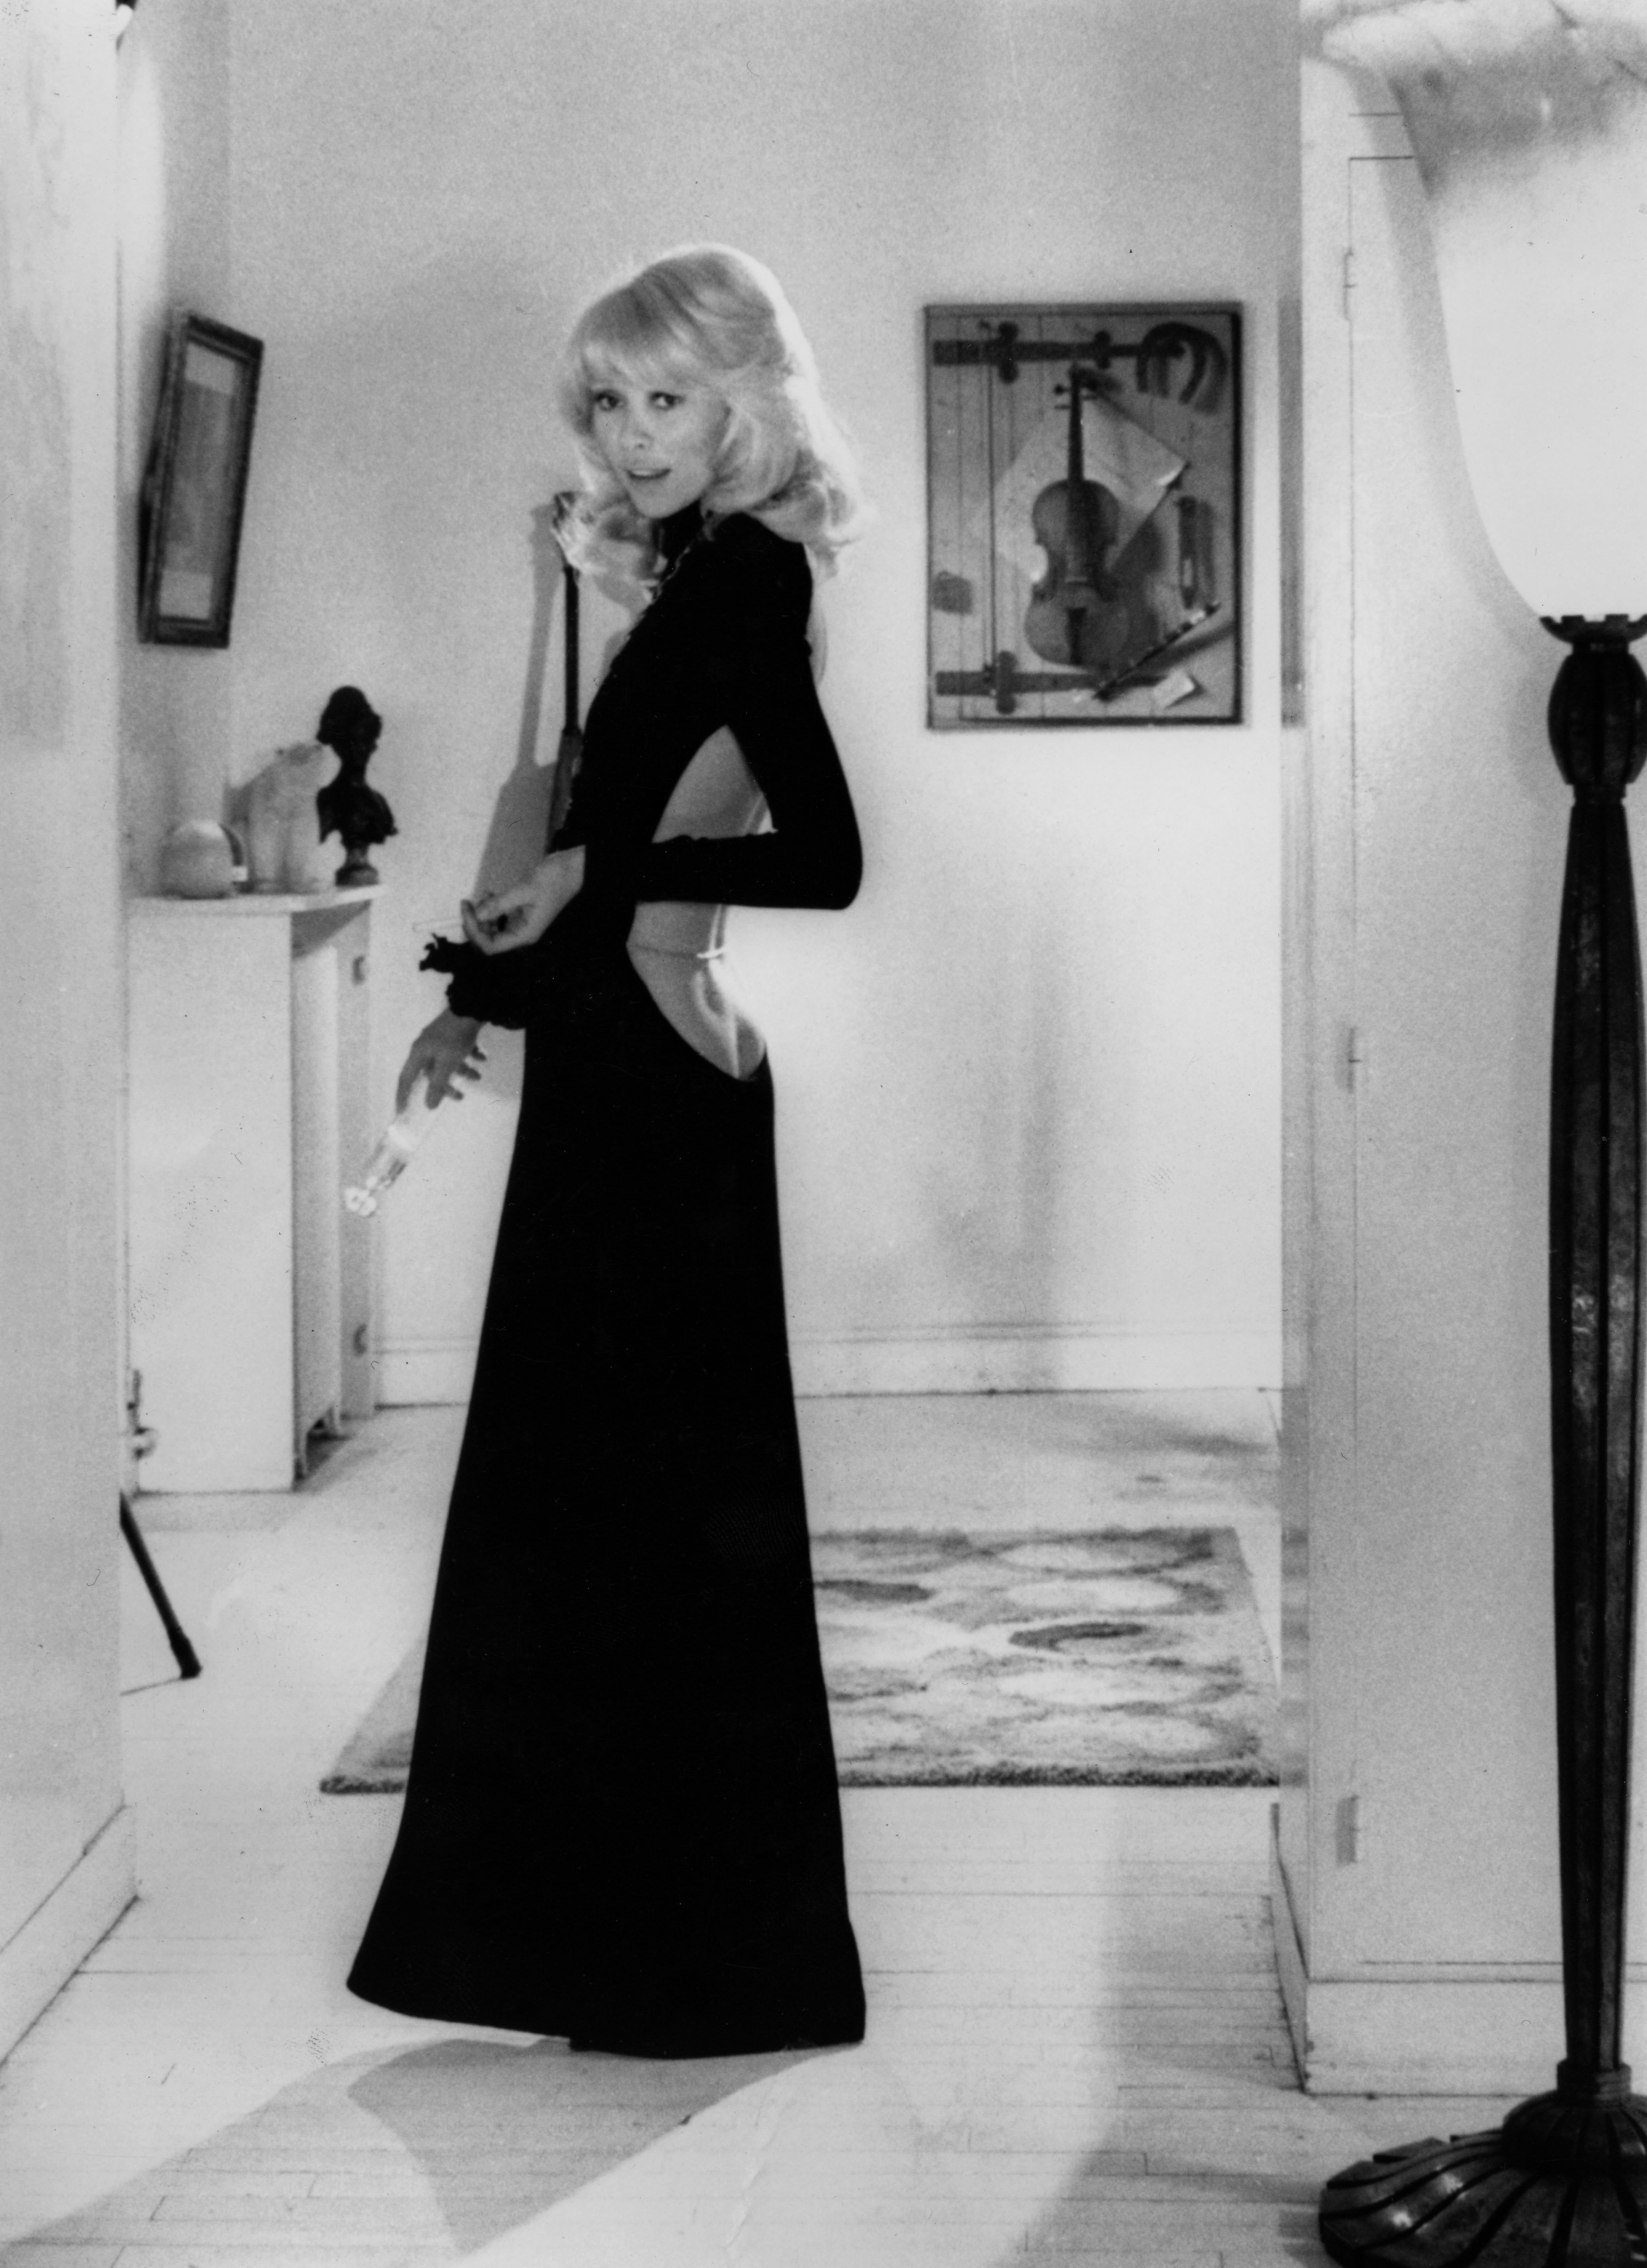 XRD1704954 Tall Blond Man with One Black Shoe by YvesRobert with Mireille Darc here wearing a dress by Guy Laroche, 1973; (add.info.: Le grand blond avec une chaussure noire de YvesRobert avec Mireille Darc ici dans une robe de Guy Laroche, 1973 Neg:A76638PL --- Tall Blond Man with One Black Shoe by YvesRobert with Mireille Darc here wearing a dress by Guy Laroche, 1973); EDITORIAL USE ONLY;  out of copyright